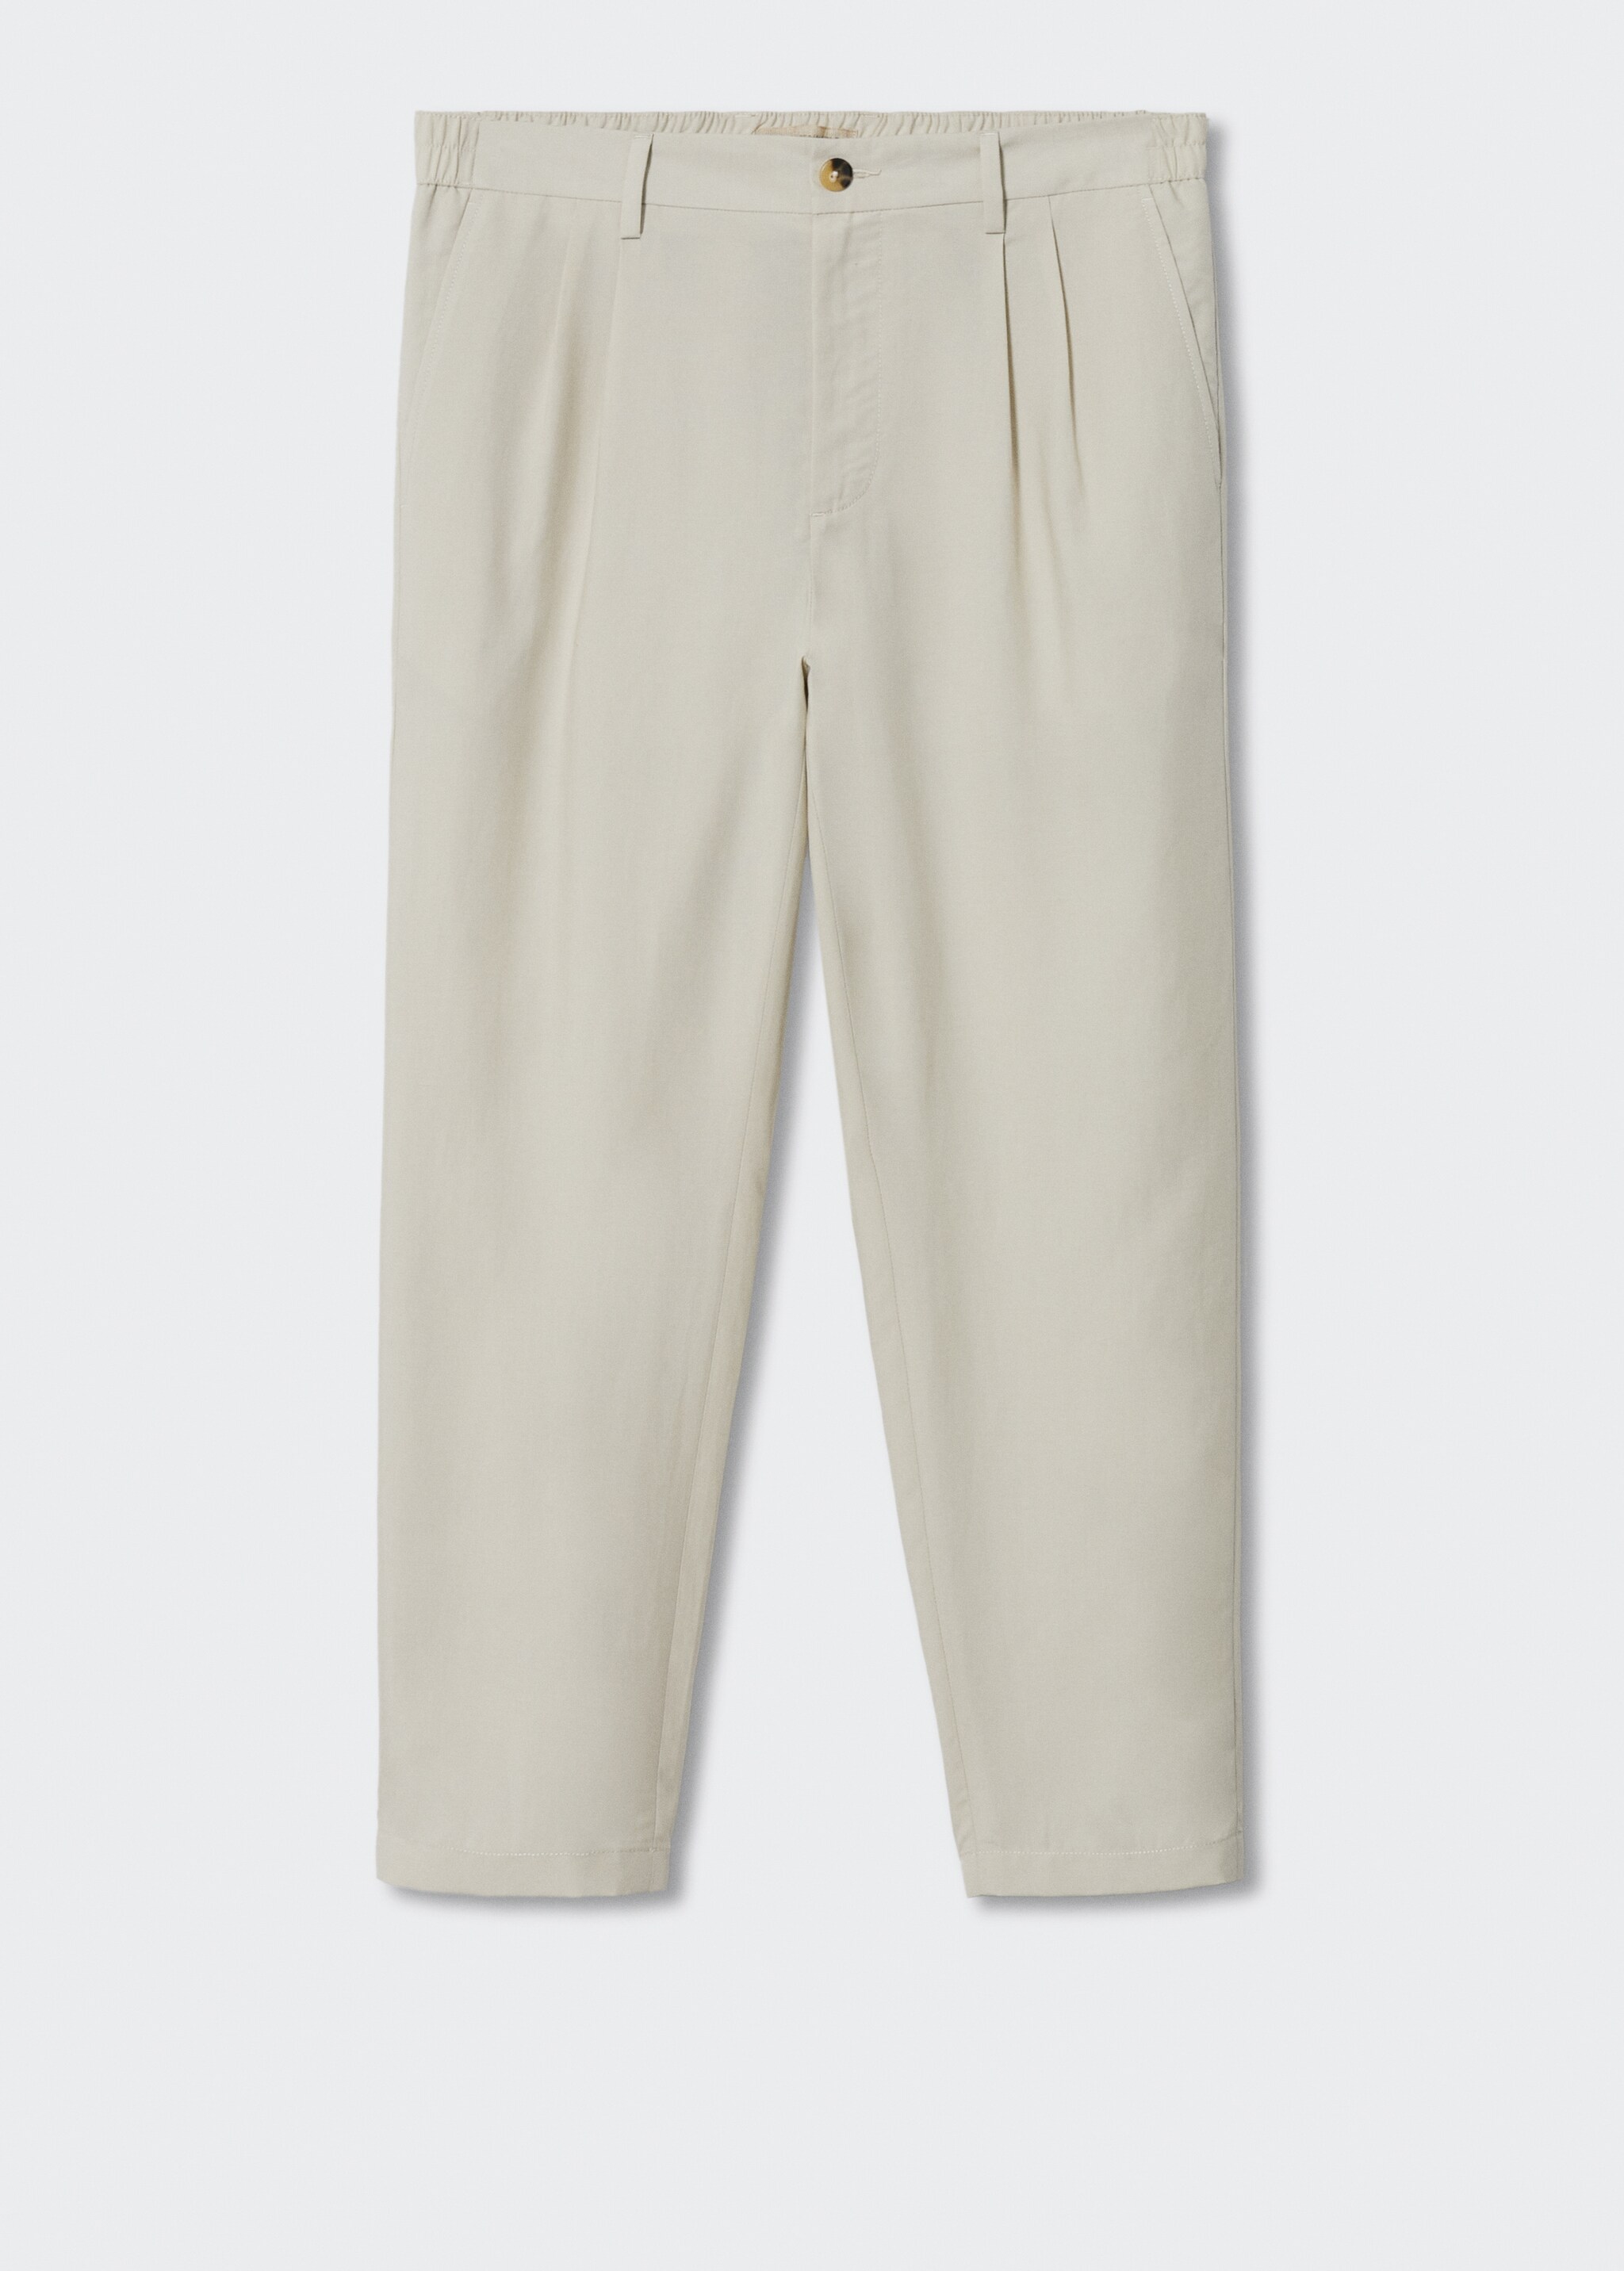 Pleated linen lyocell trousers - Article without model